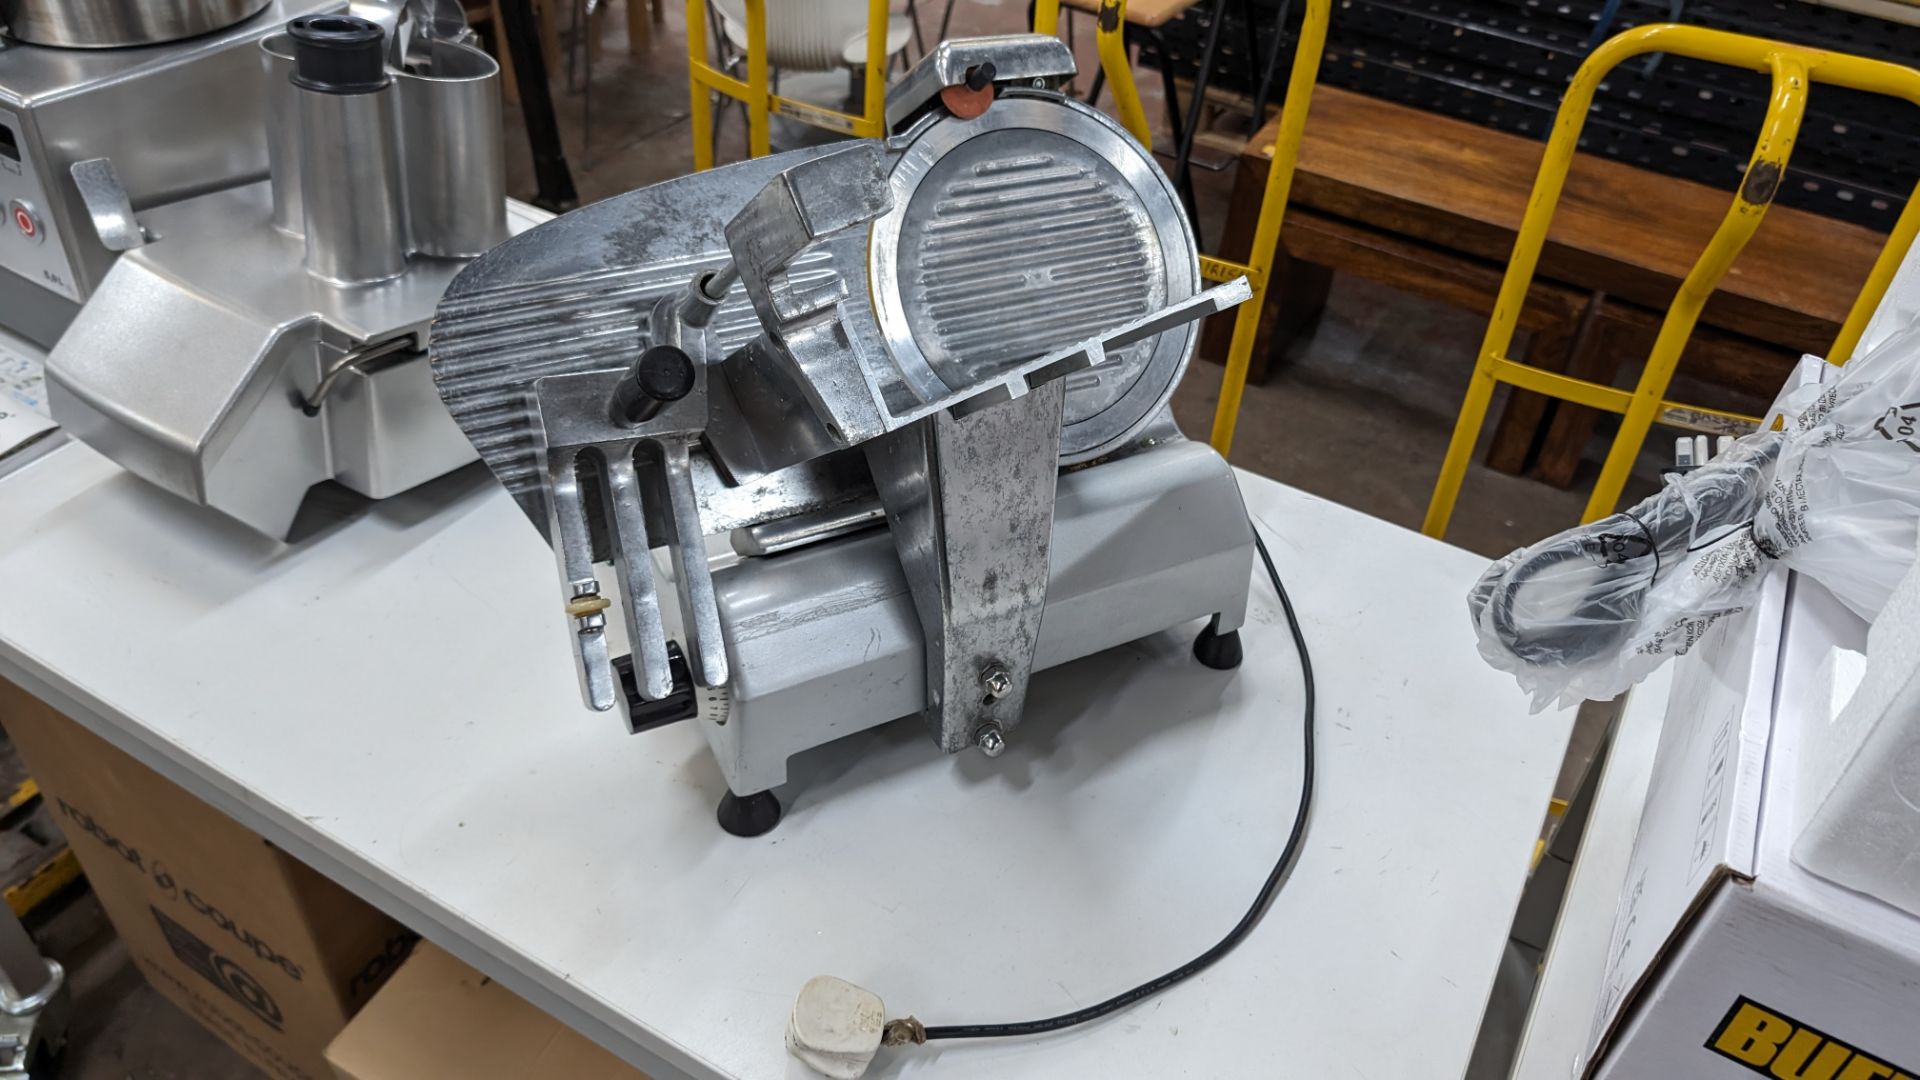 Semi-automatic meat slicer model WED-B250B-2 - Image 9 of 9